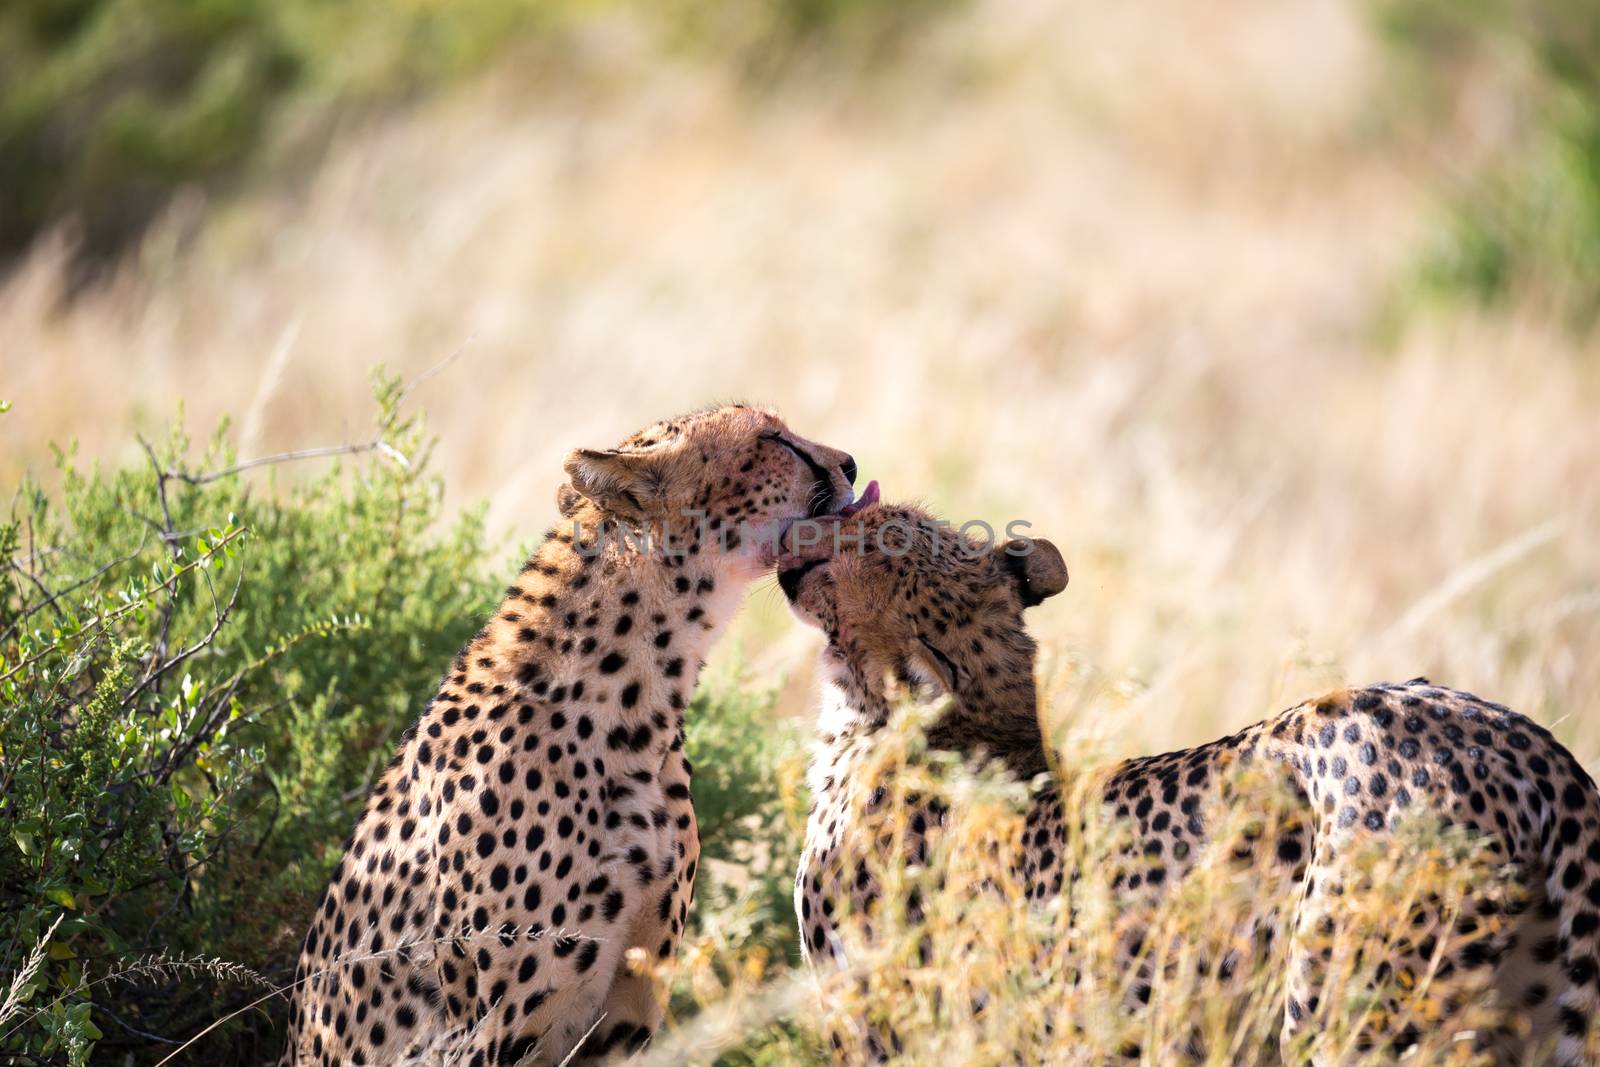 The cheetahs brush each other after the meal